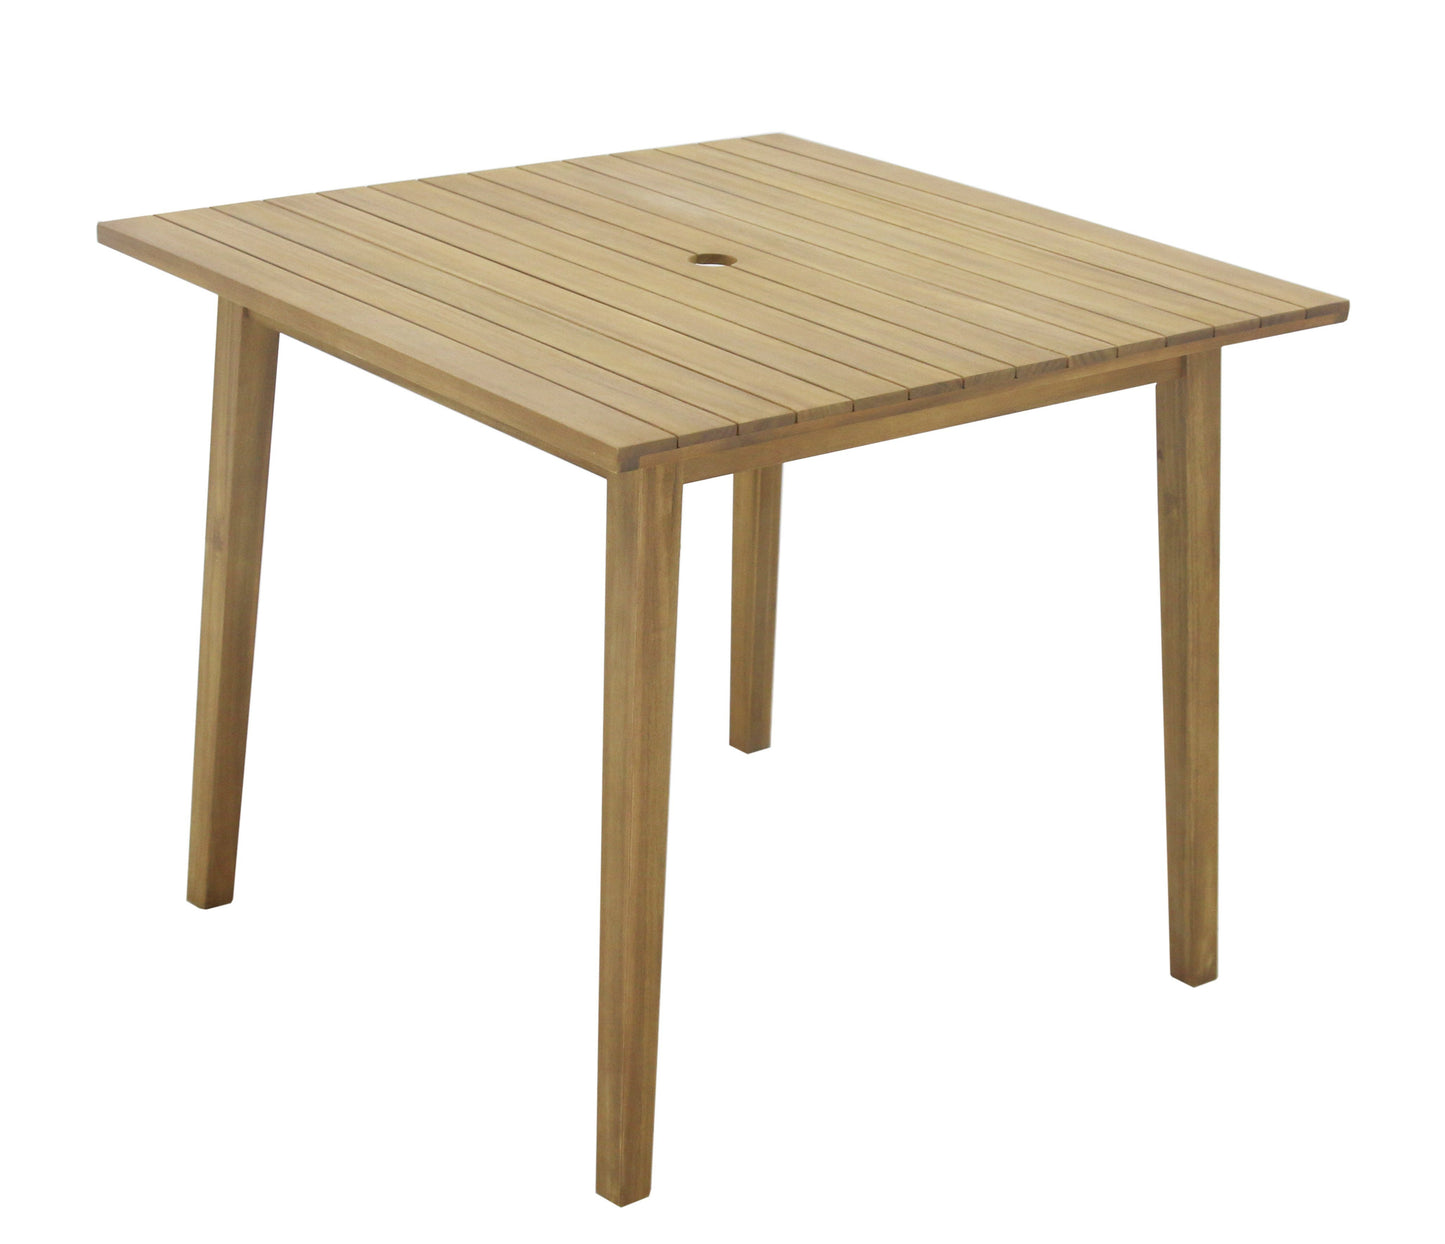 Ackley garden dining table - 4 seater - solid acacia wood